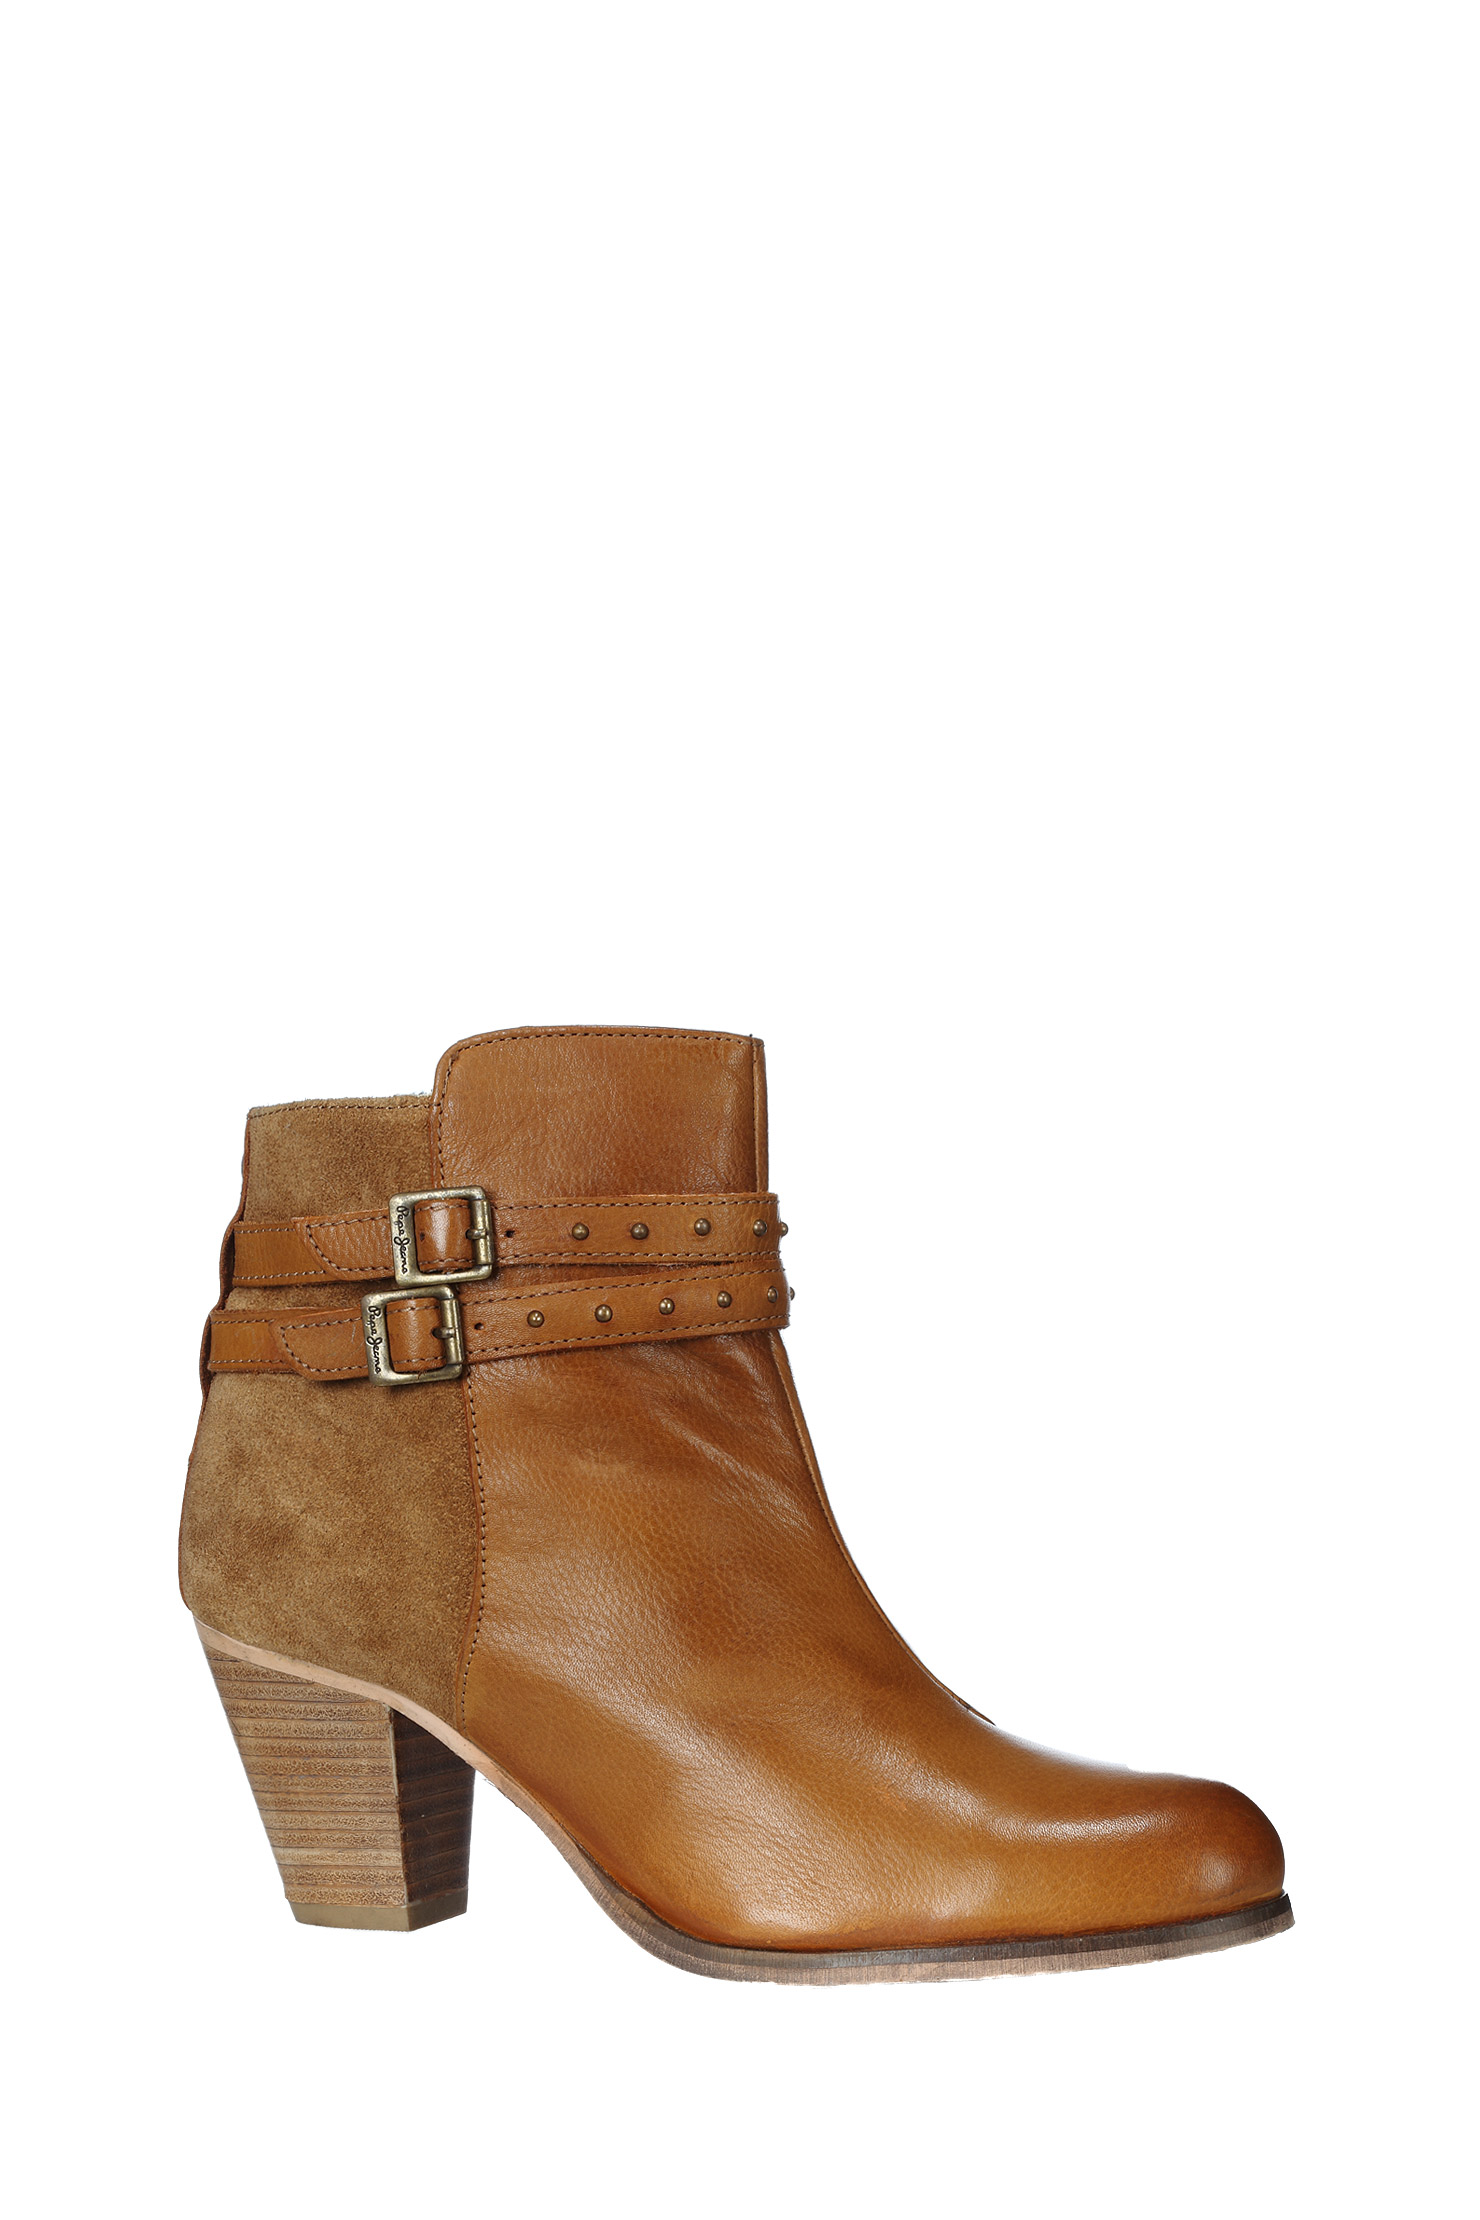 Pepe Jeans Boots Shoes in Brown | Lyst